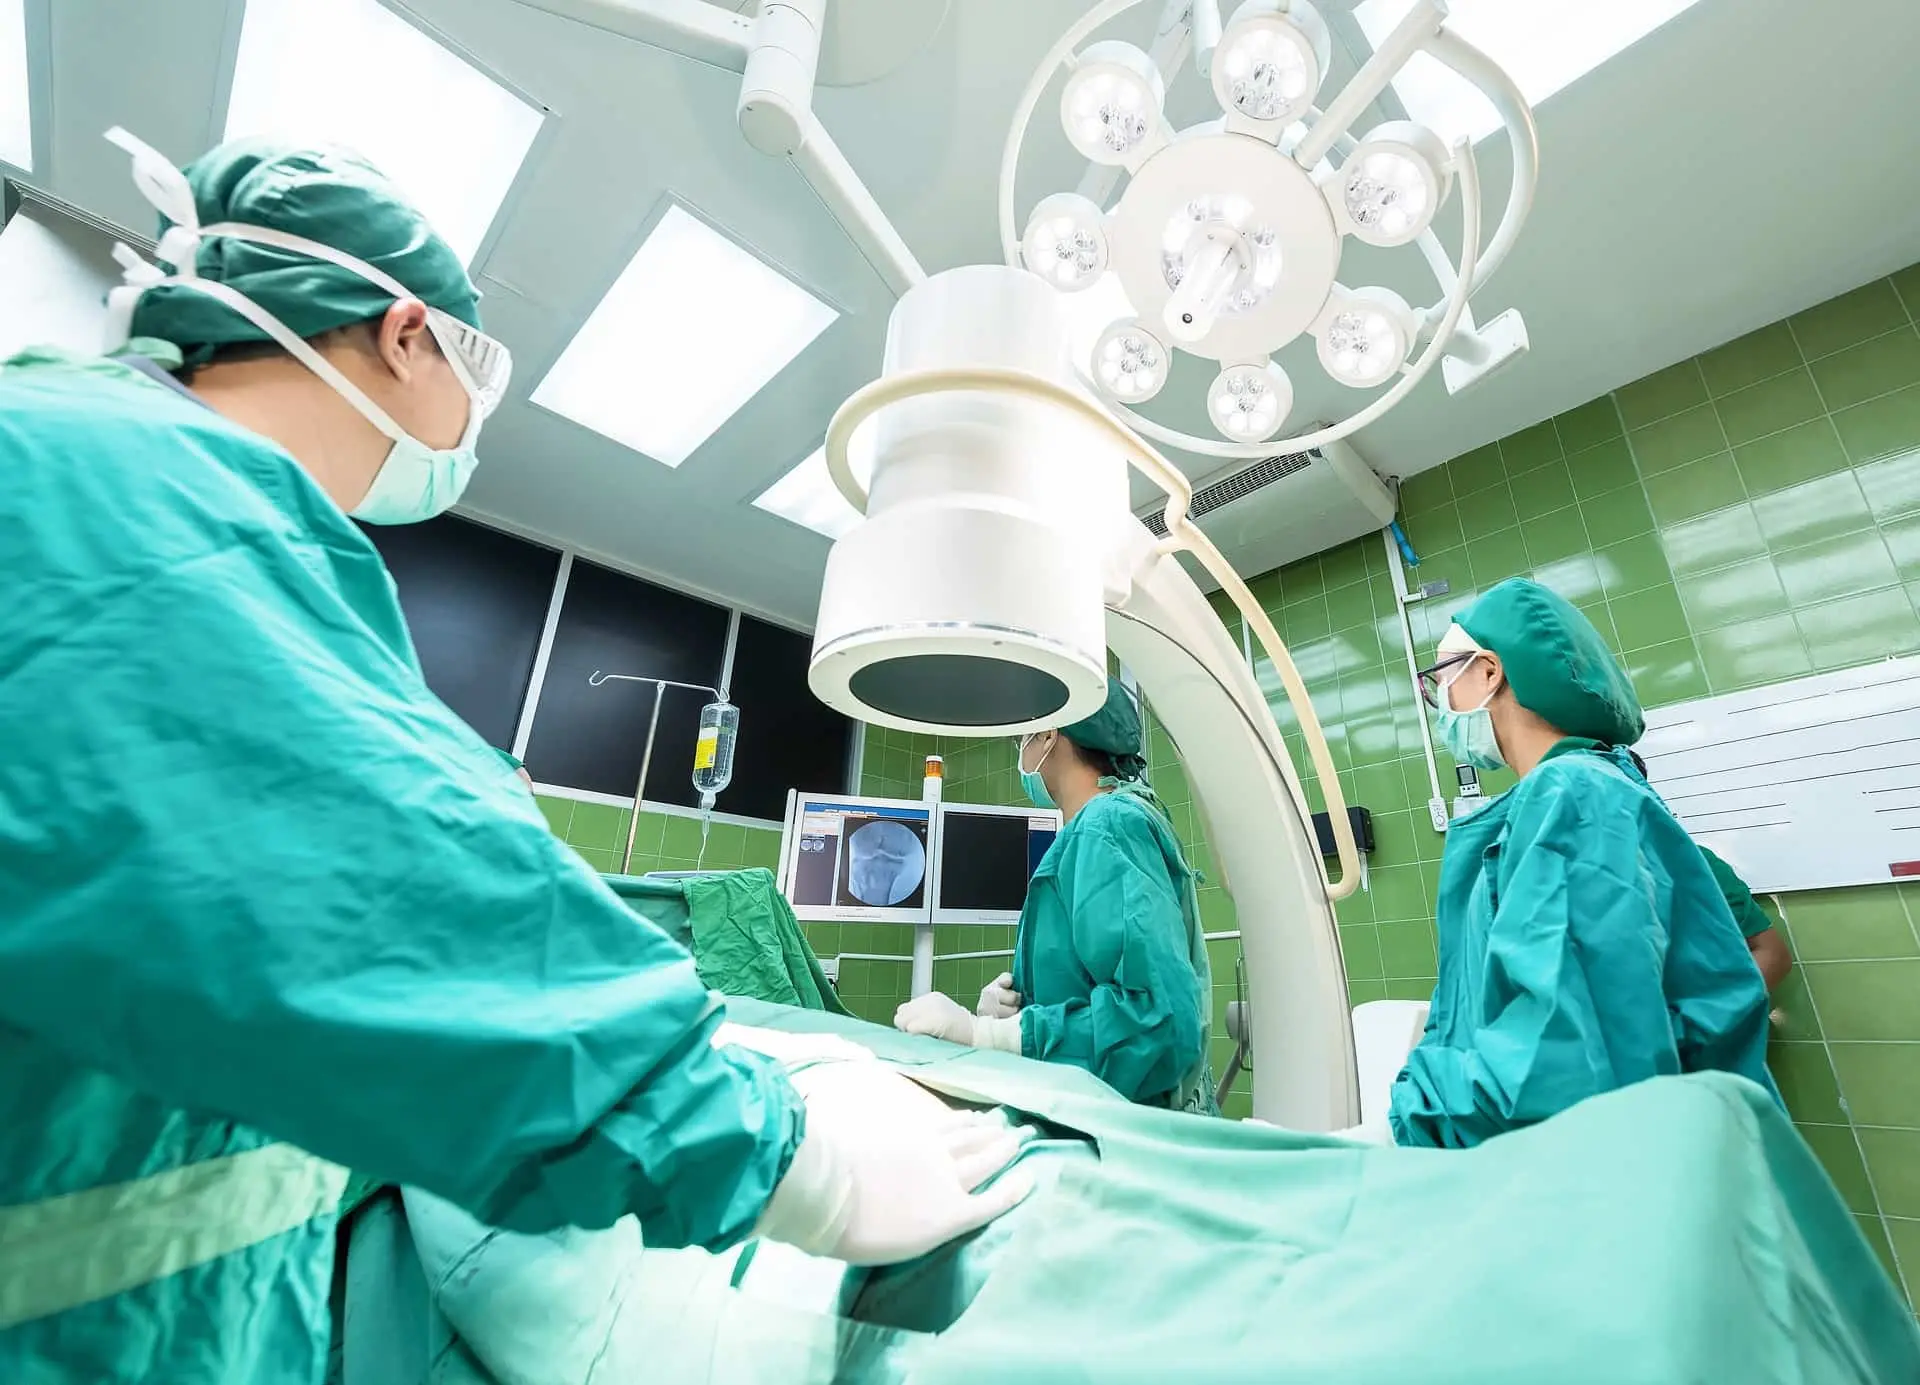 Surgical team in surgery